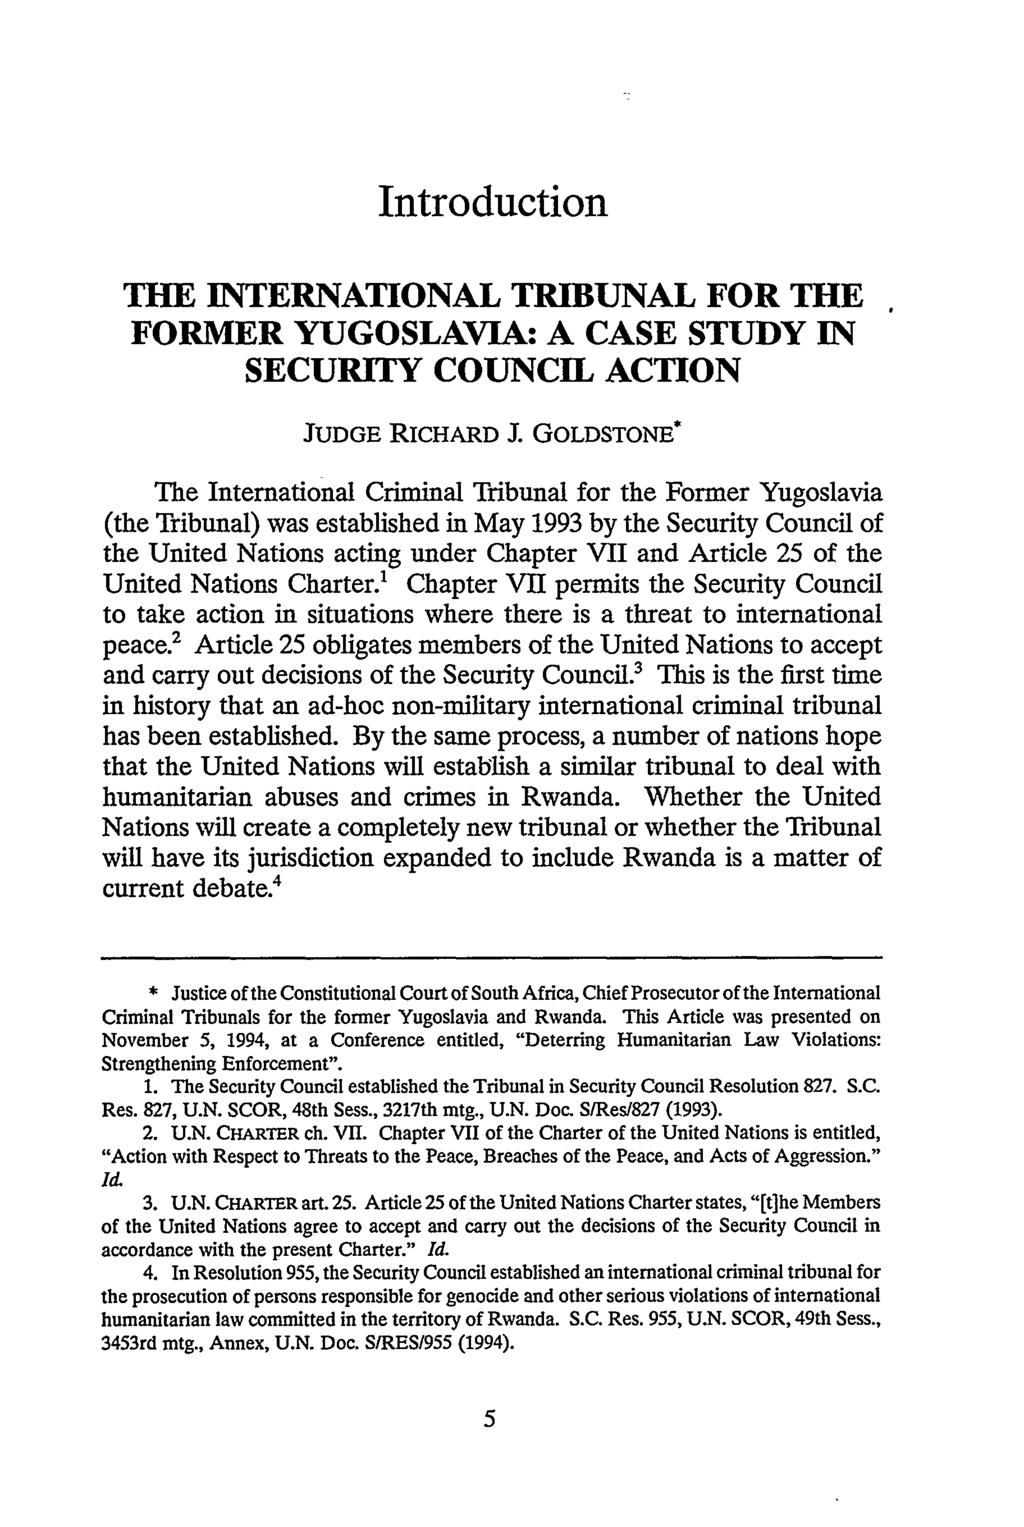 Introduction THE INTERNATIONAL TRIBUNAL FOR THE FORMER YUGOSLAVIA: A CASE STUDY IN SECURITY COUNCIL ACTION JUDGE RICHARD J.